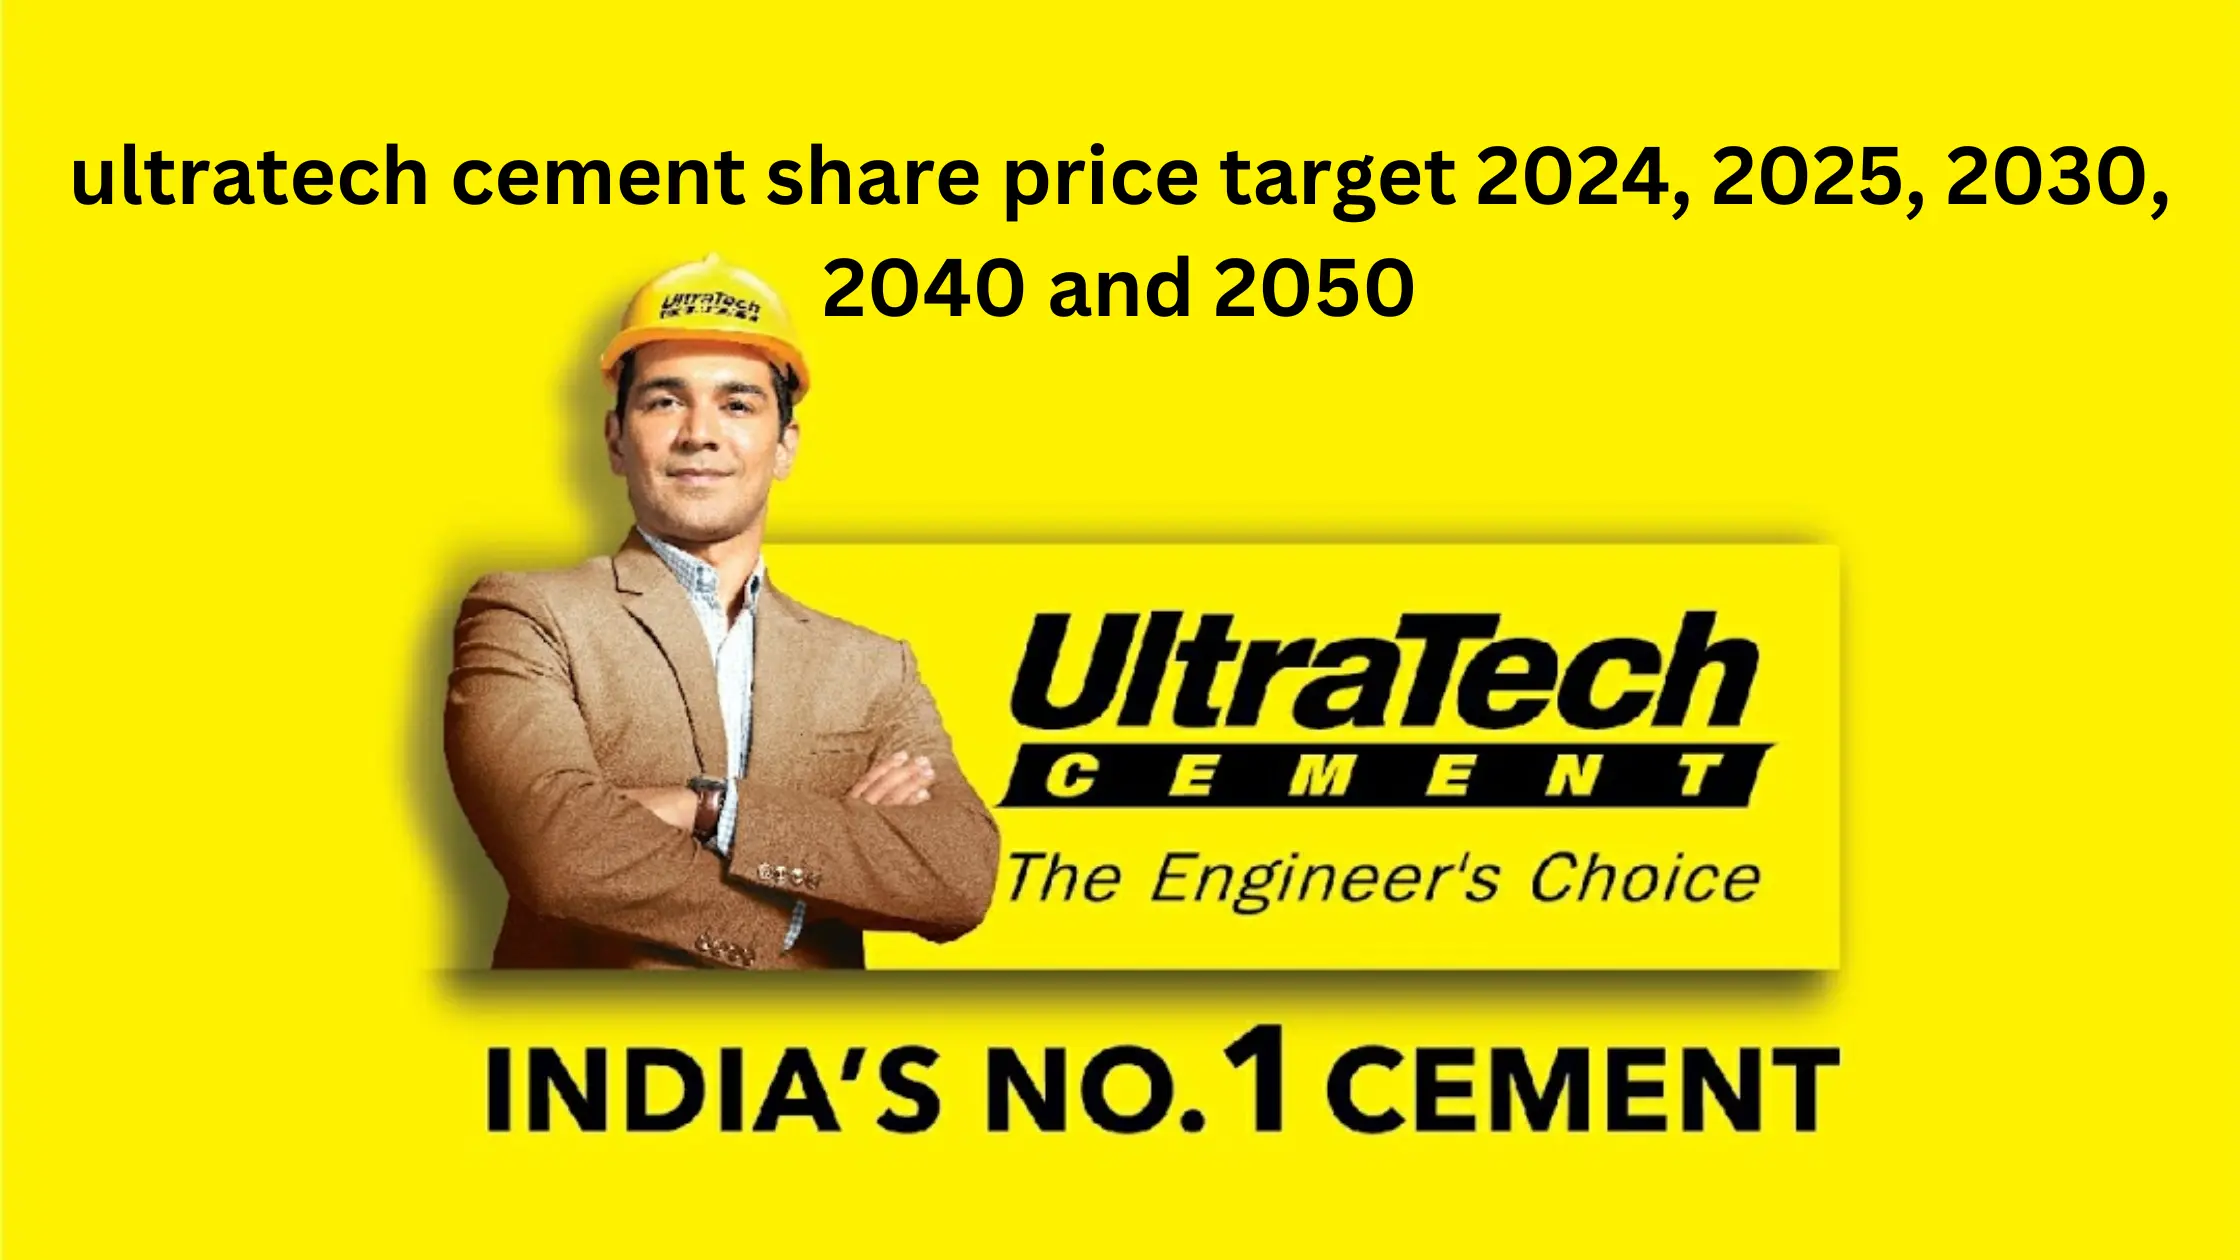 ultratech cement share price target